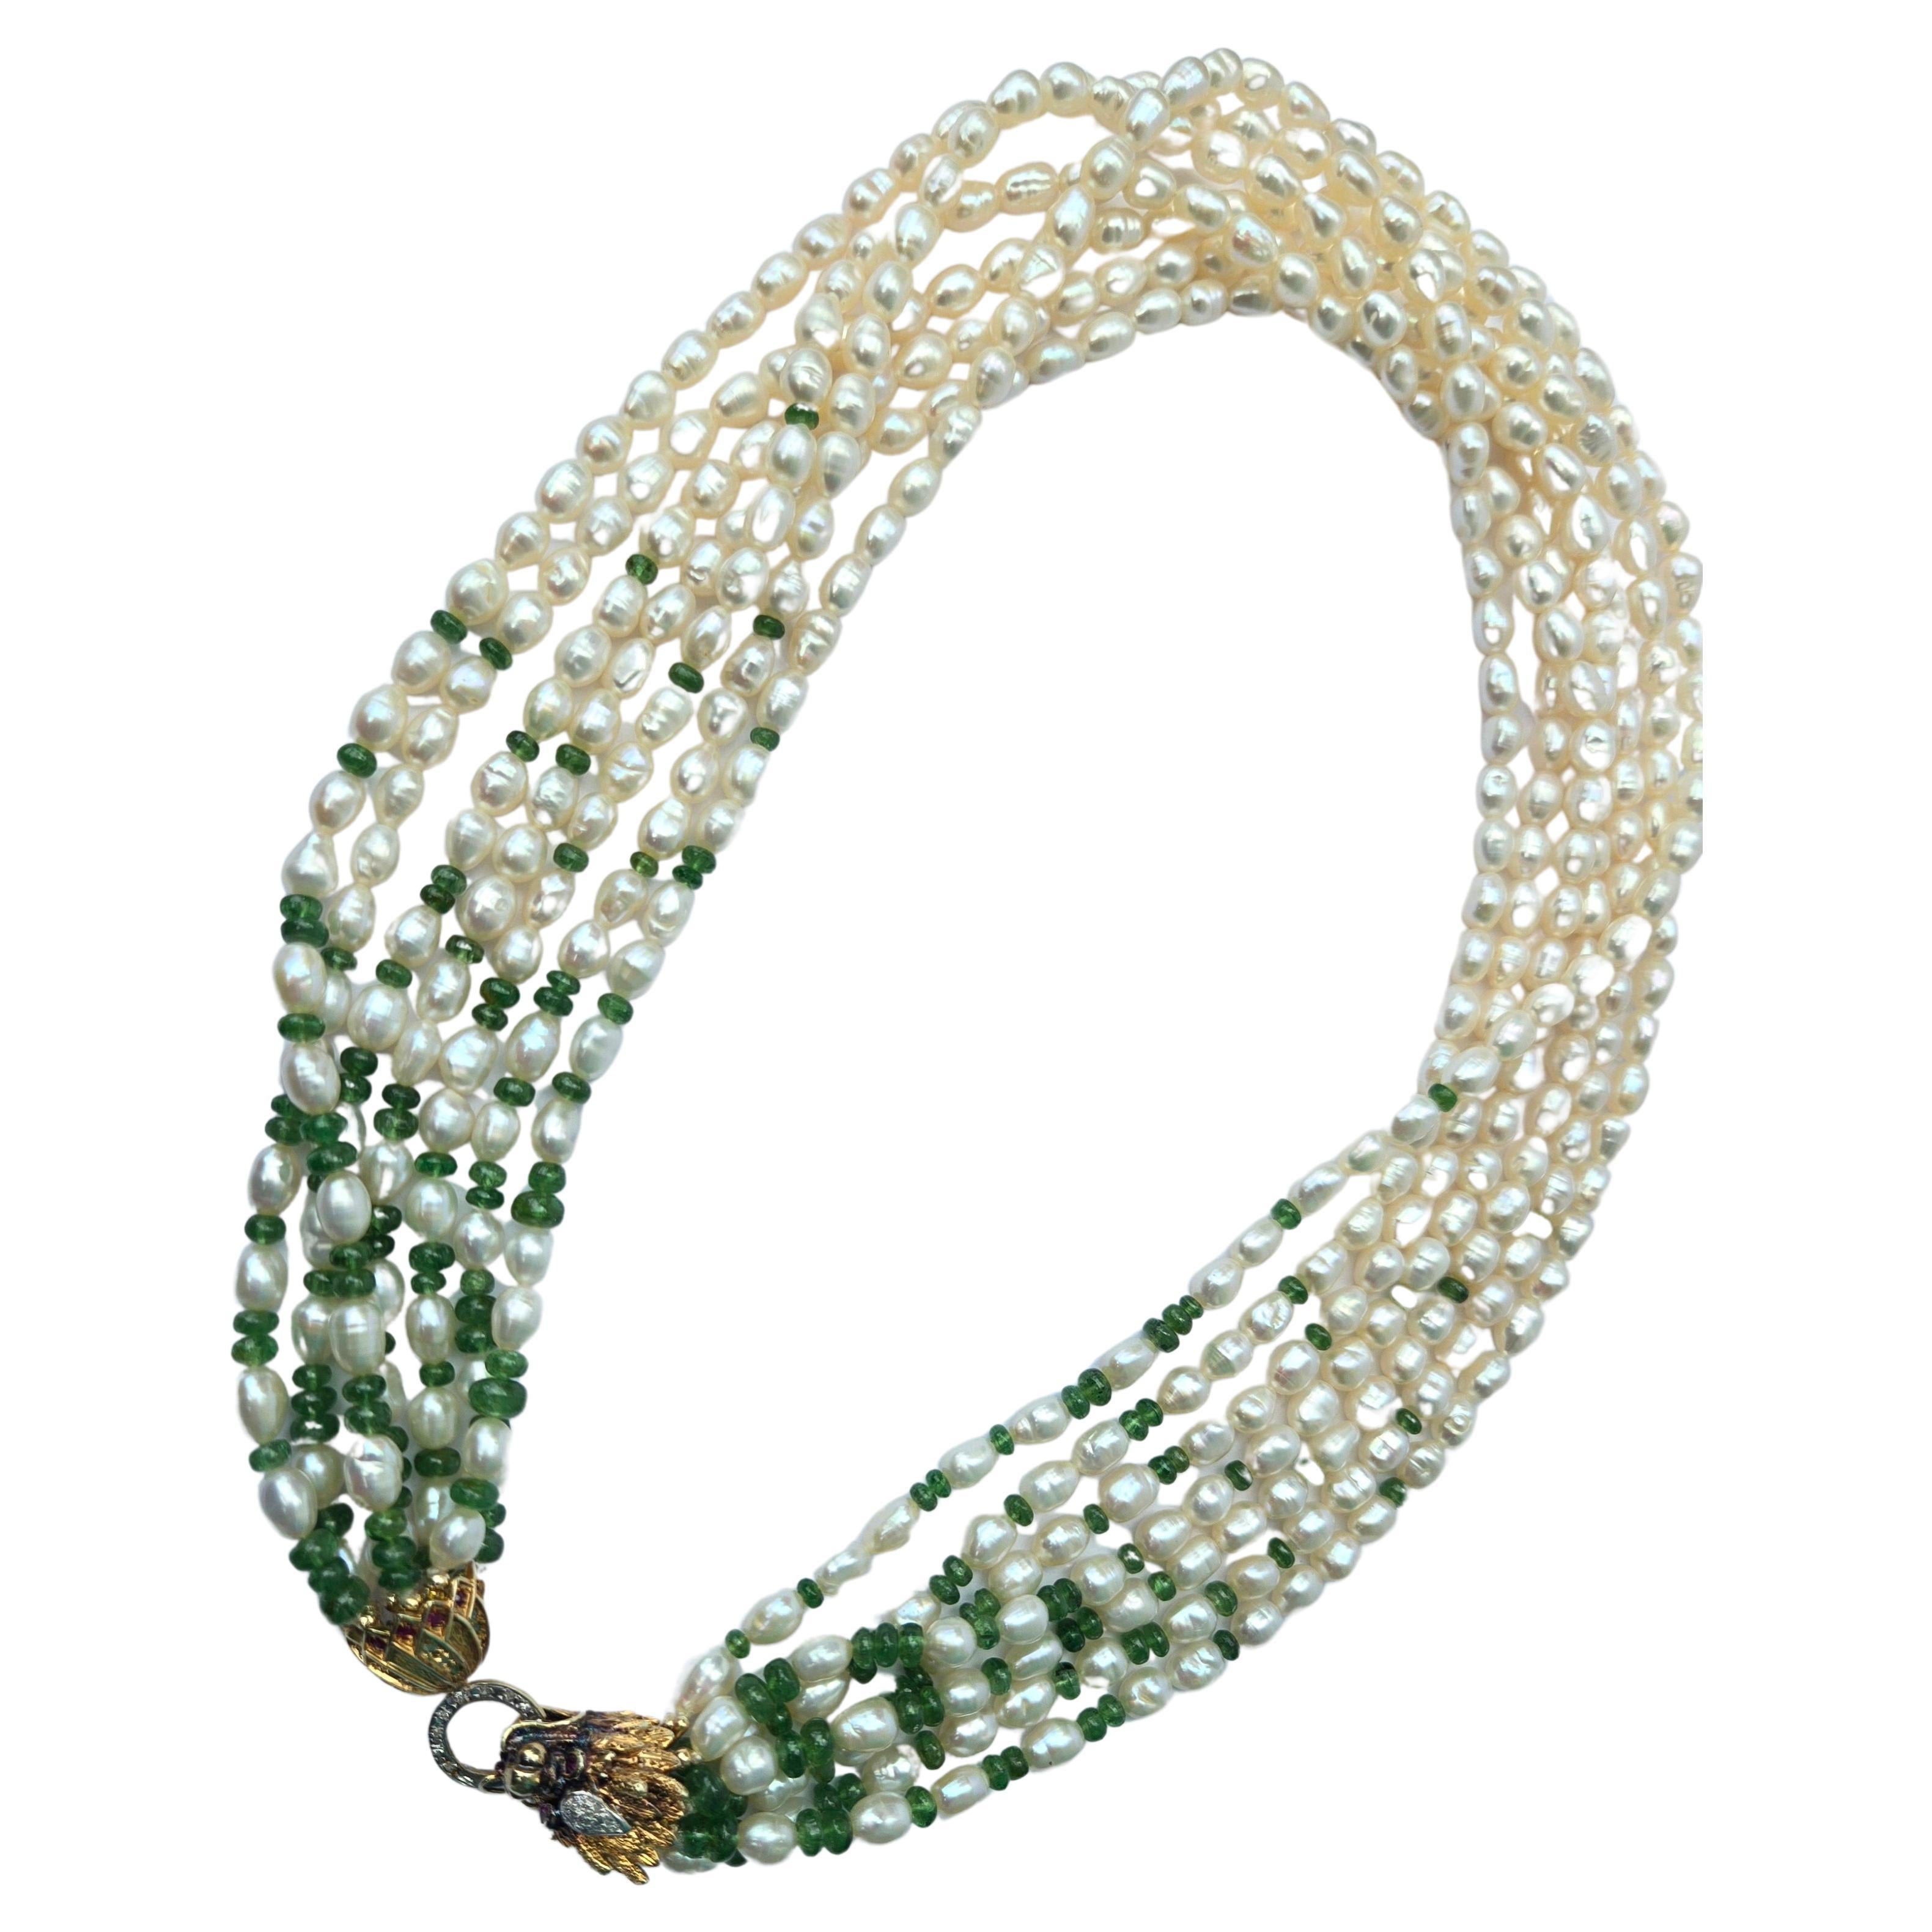 Necklace made up of seven strands of lovely oval cultured pearls. These are interspersed with a fade out of tumbled emerald beads from the beautiful vintage an exquisite gold dragon clasp. The clasp is patinated 14kt yellow and white gold set with